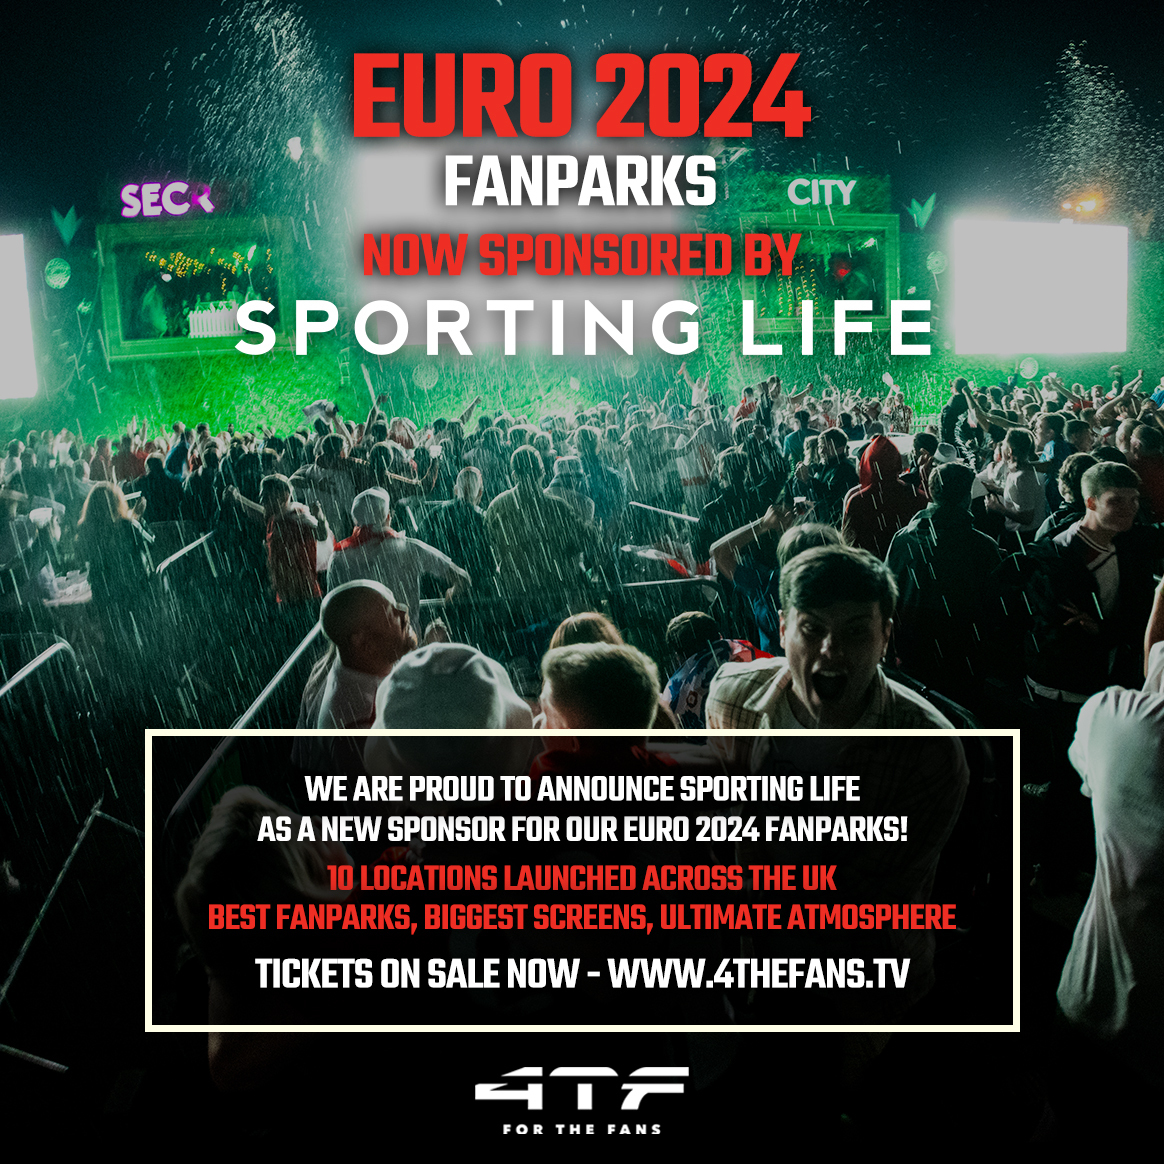 Sporting Life 🤝 @4thefansevents We are delighted to be partnering with the hosts of the best Euro 2024 fan parks... 📍10 UK locations 🖥 The biggest screens 🔥 Incredible atmosphere 🎤 Guest football legends 🍿 First-class entertainment A unique fan experience. #Euro2024